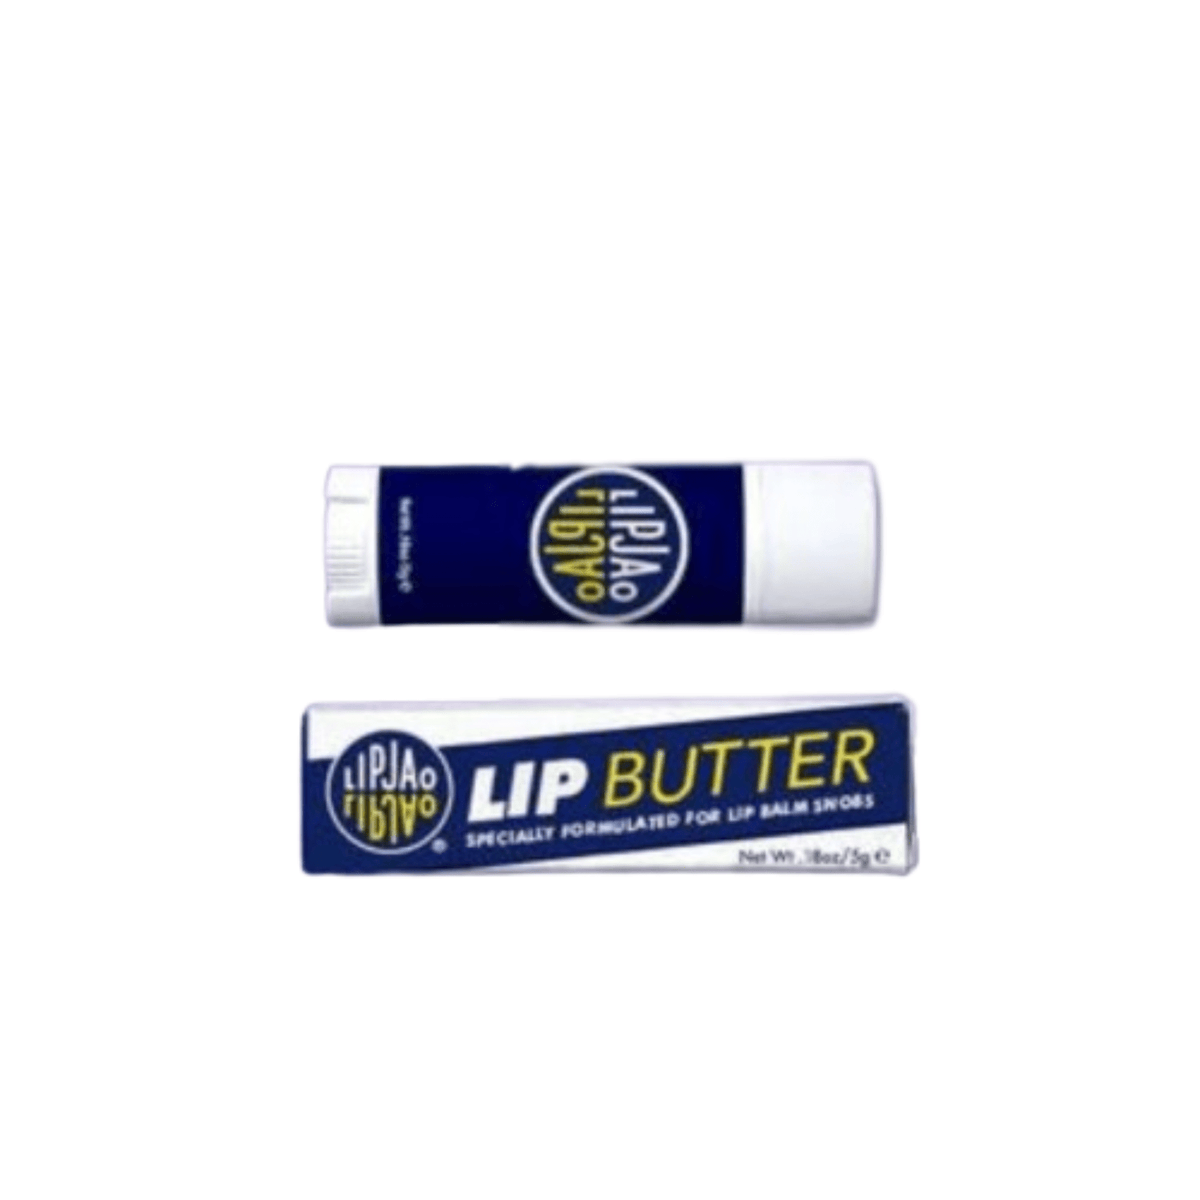 Primary Image of Lipjao Lip Butter